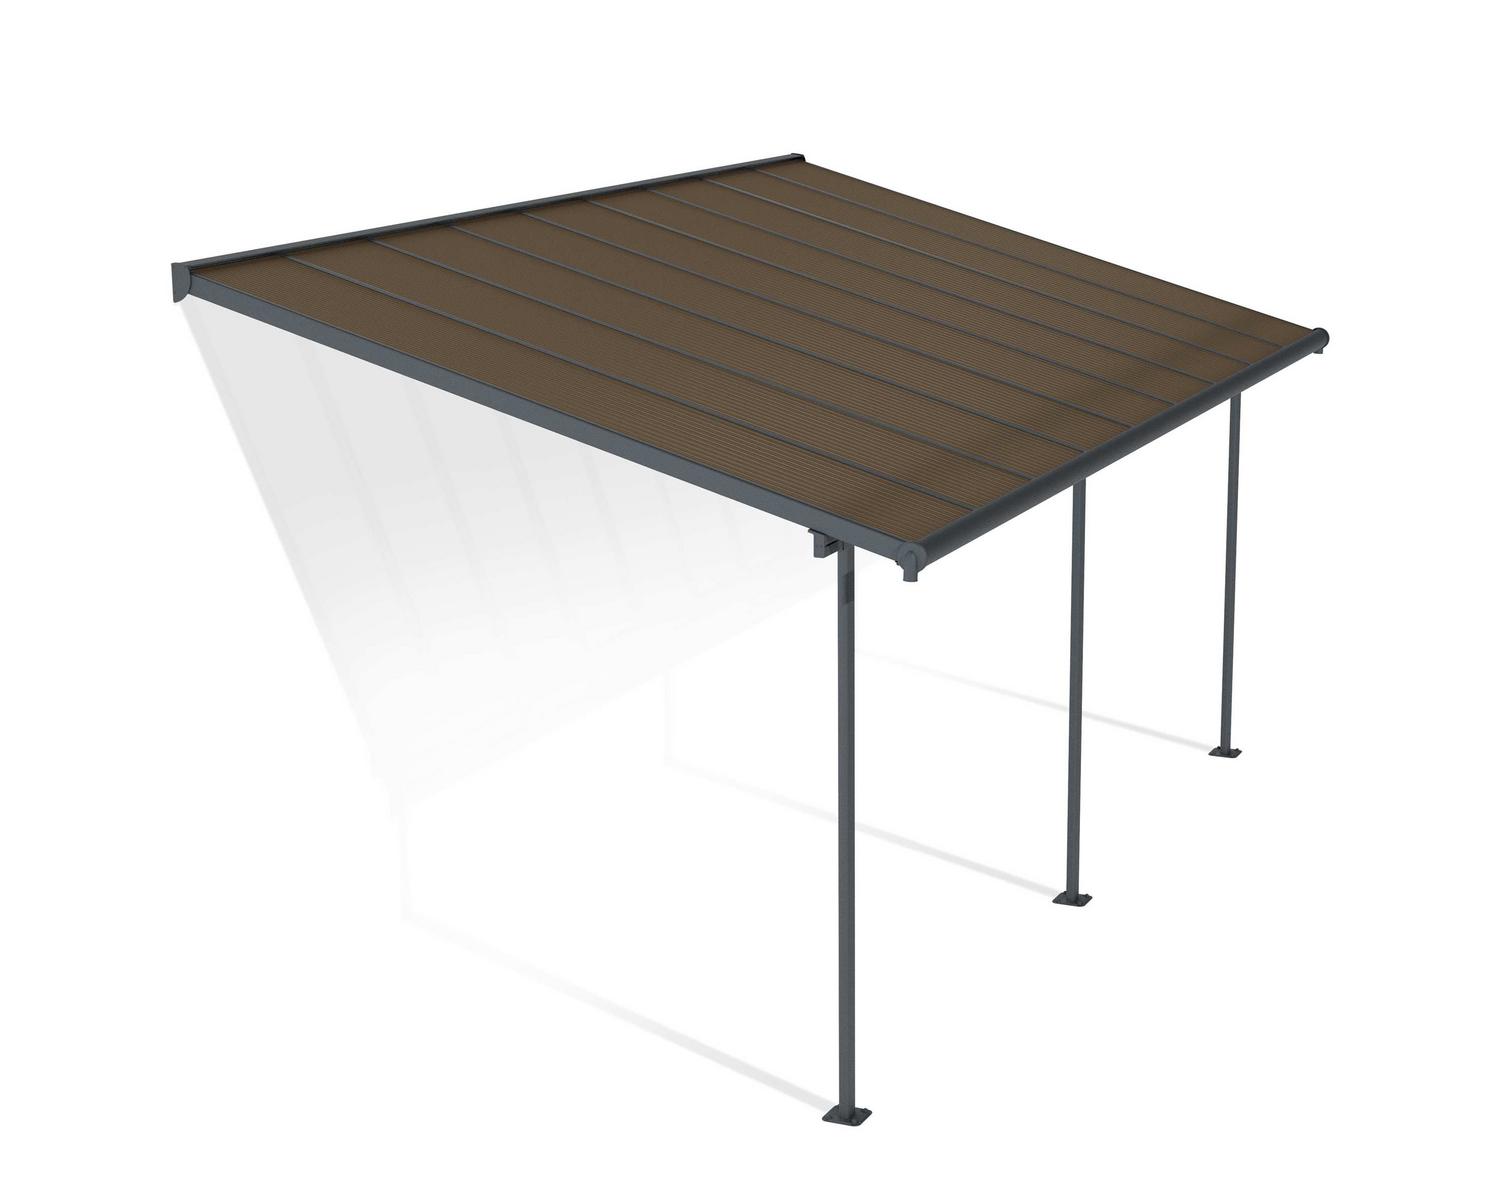 Capri 10 ft. x 18 ft. Grey Aluminium Patio Cover With 3 Posts, Bronze-tinted twin-wall polycarbonate roof panels.